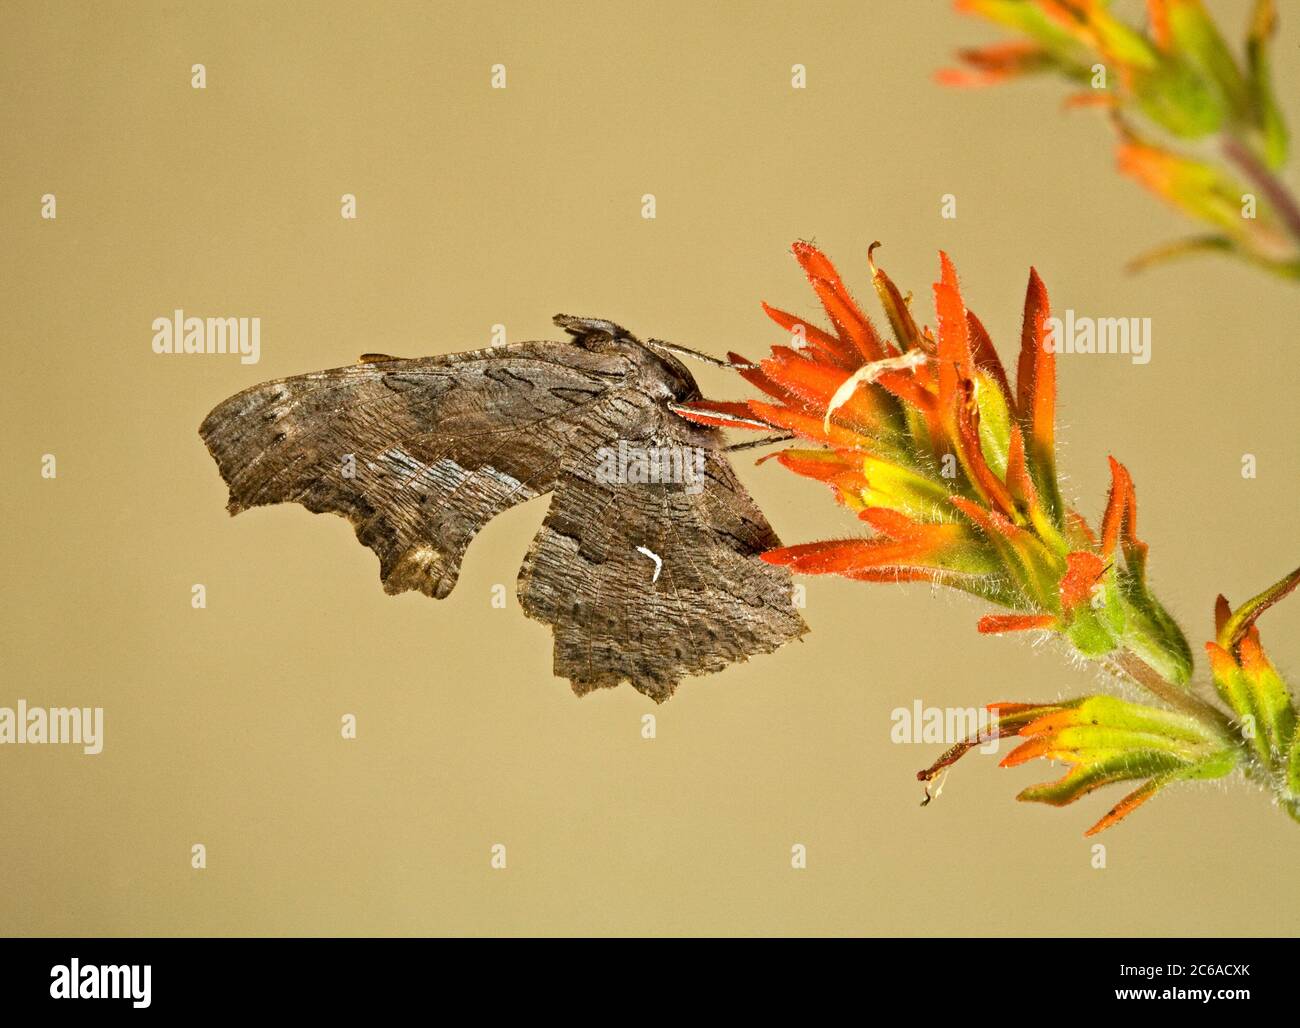 Detail of a Green Comma Butterfly, Polygonia faunus, also called Faunus comma, or Faunus anglewing. From the Ochoco Mountains of central oregon. Stock Photo